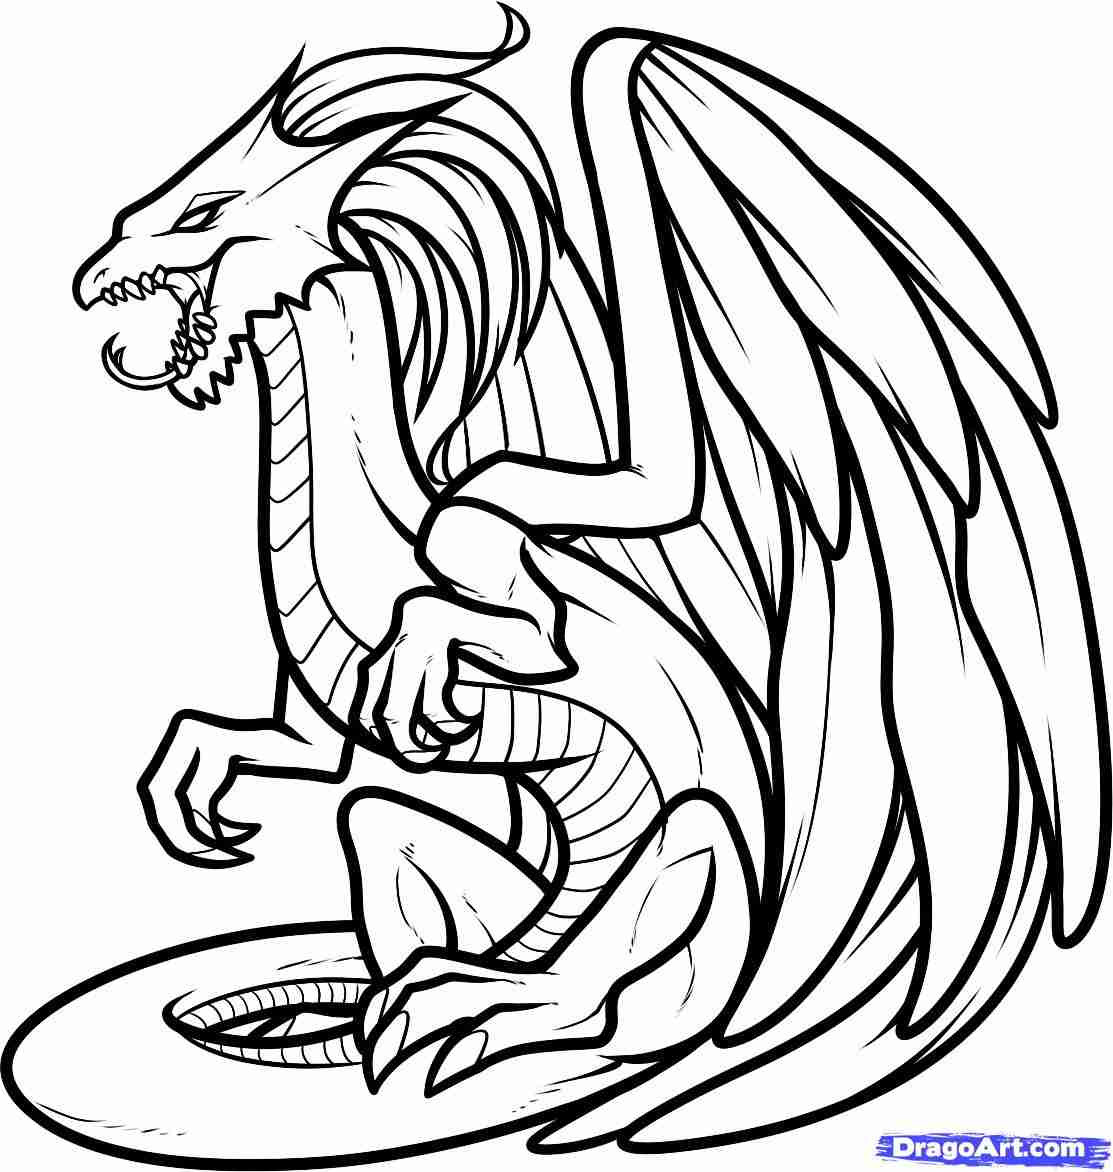 fire-dragon-coloring-pages-at-getcolorings-free-printable